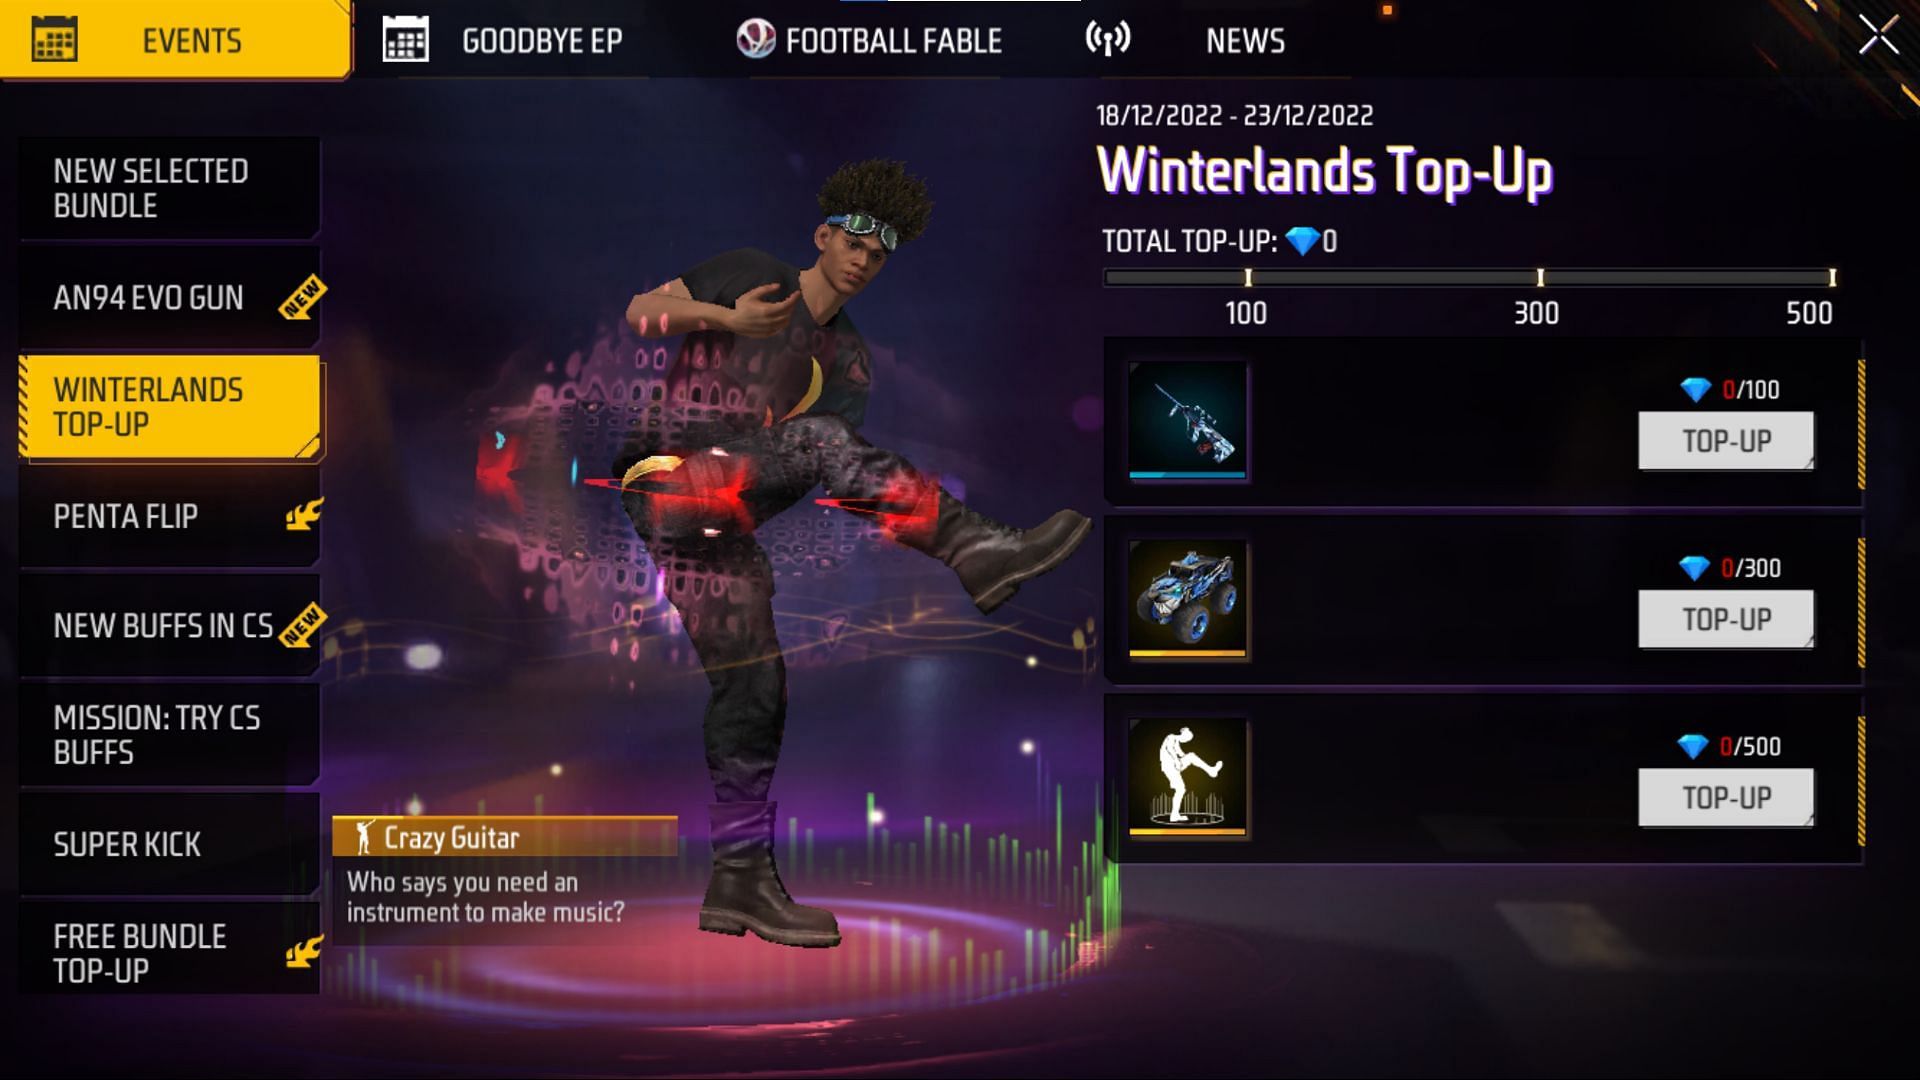 Winterlands Top-Up has commenced within the game (Image via Garena)